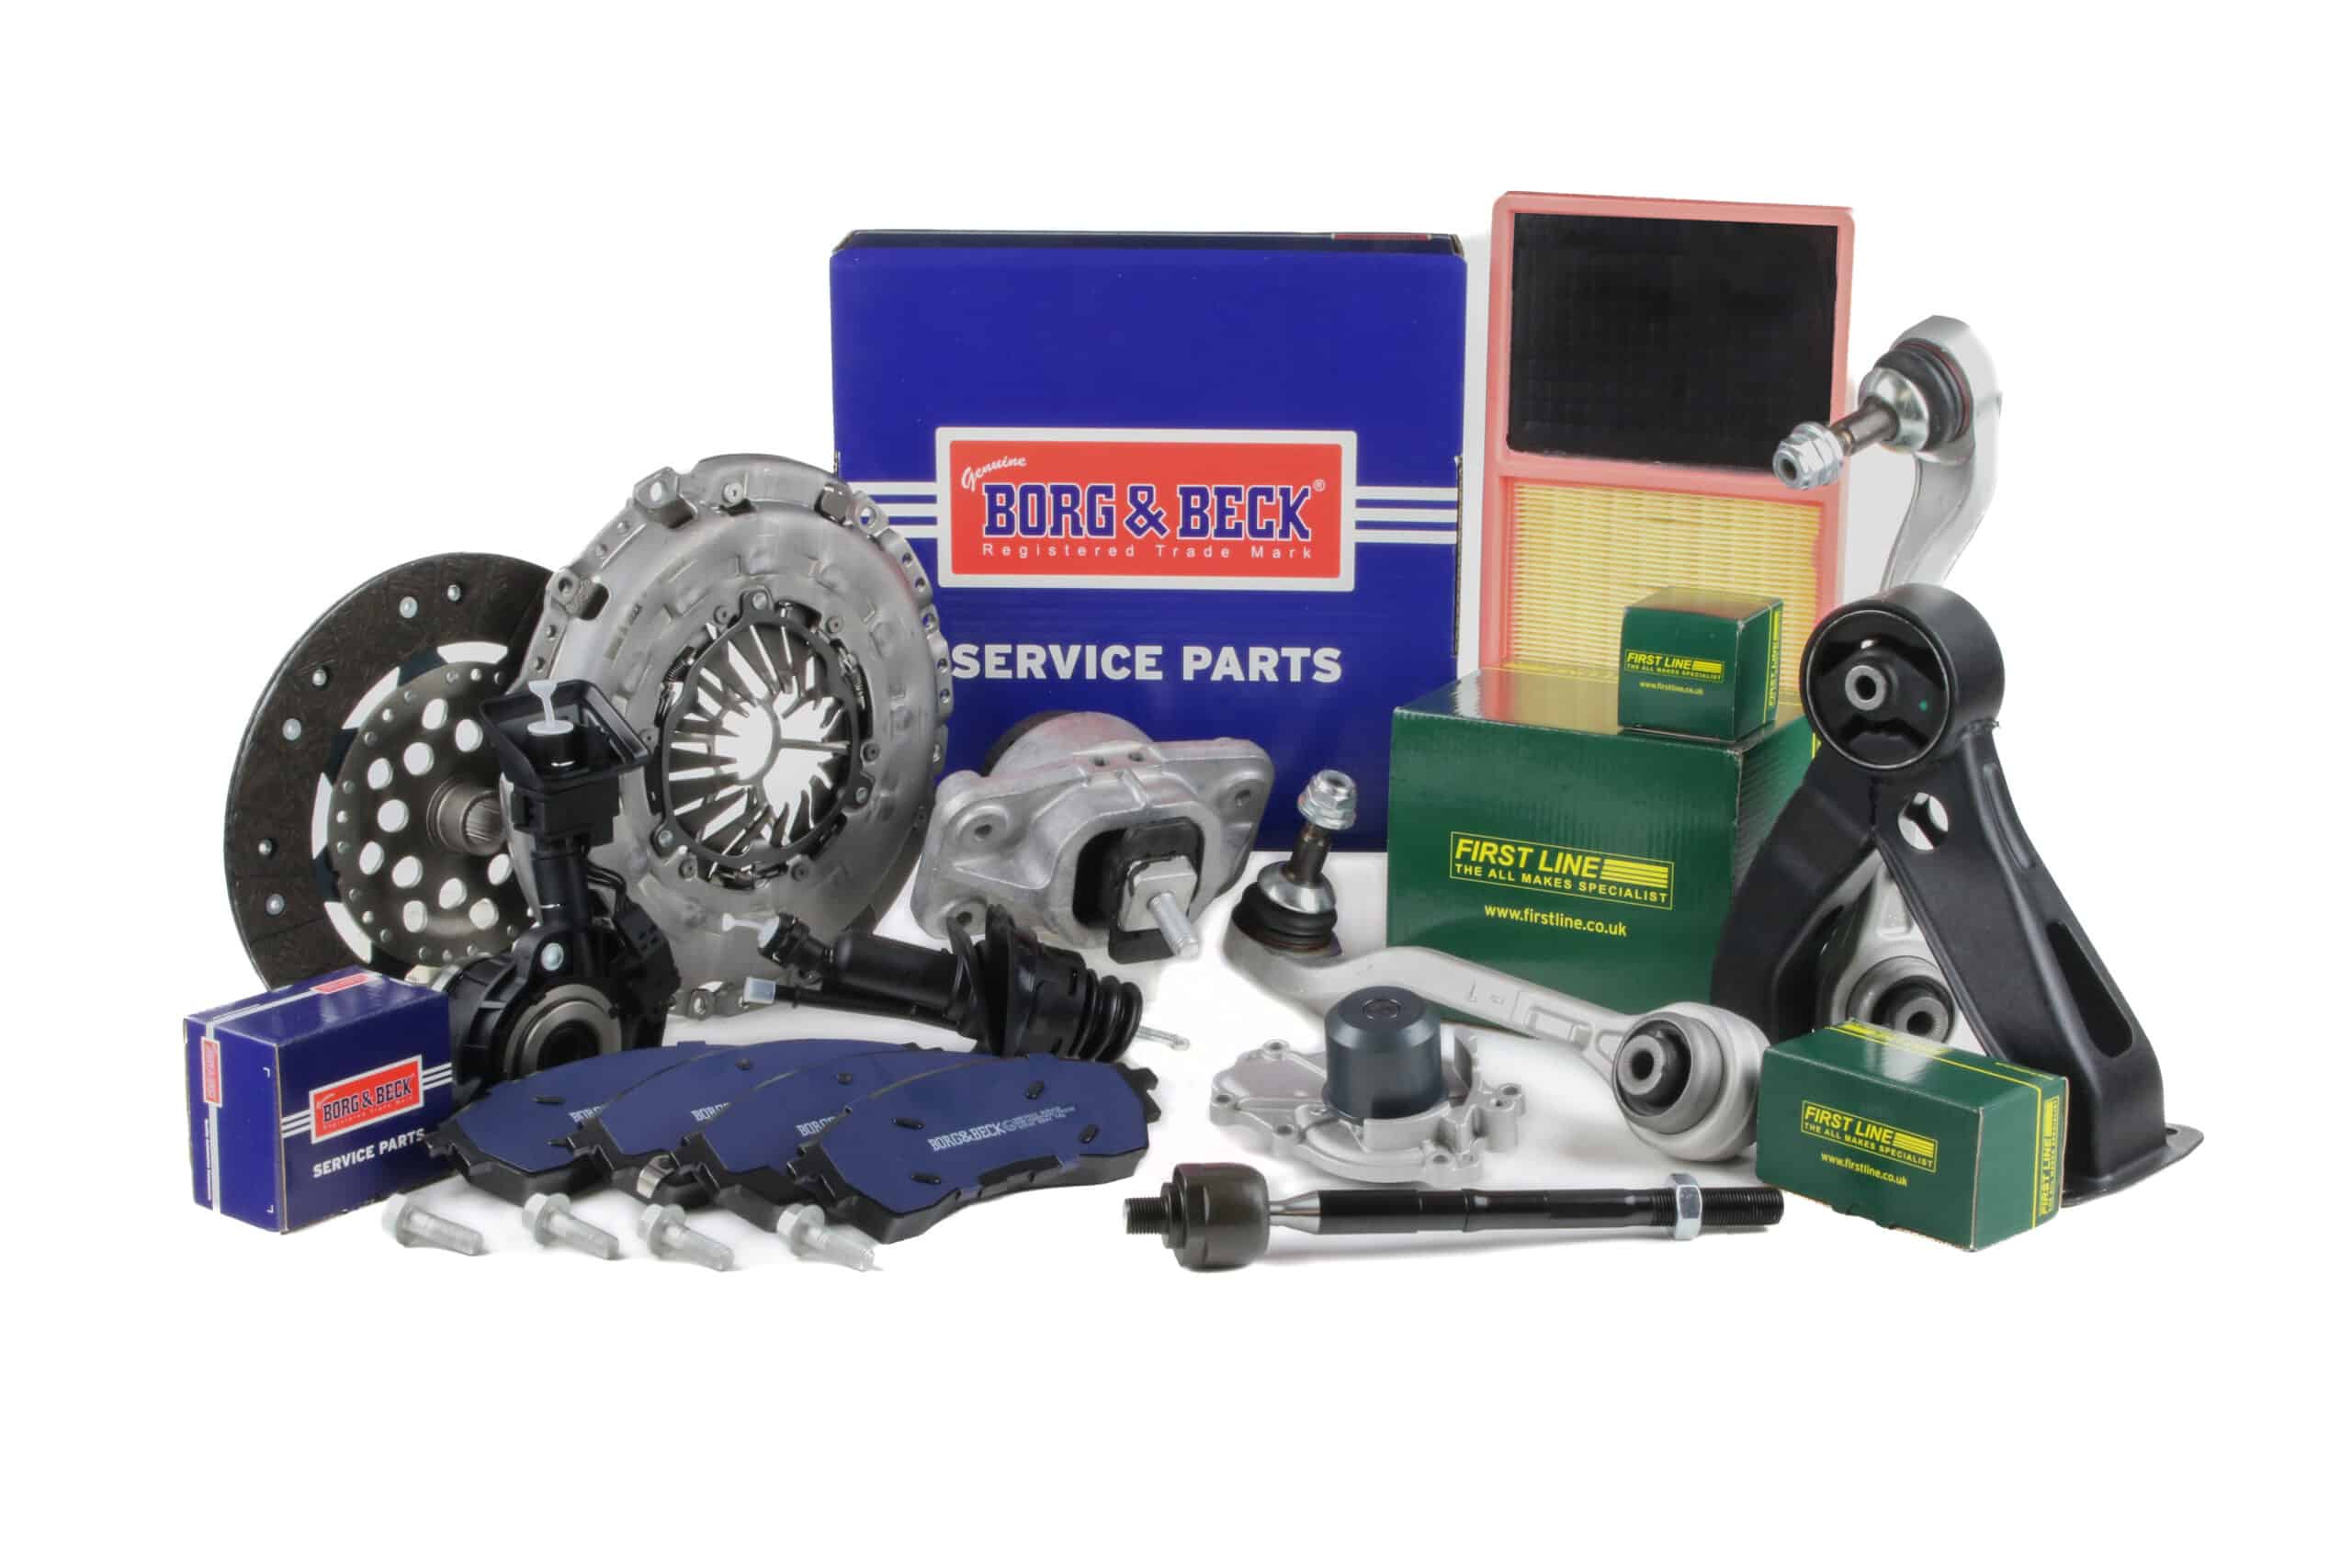 First Line has added brake parts in its range expansion